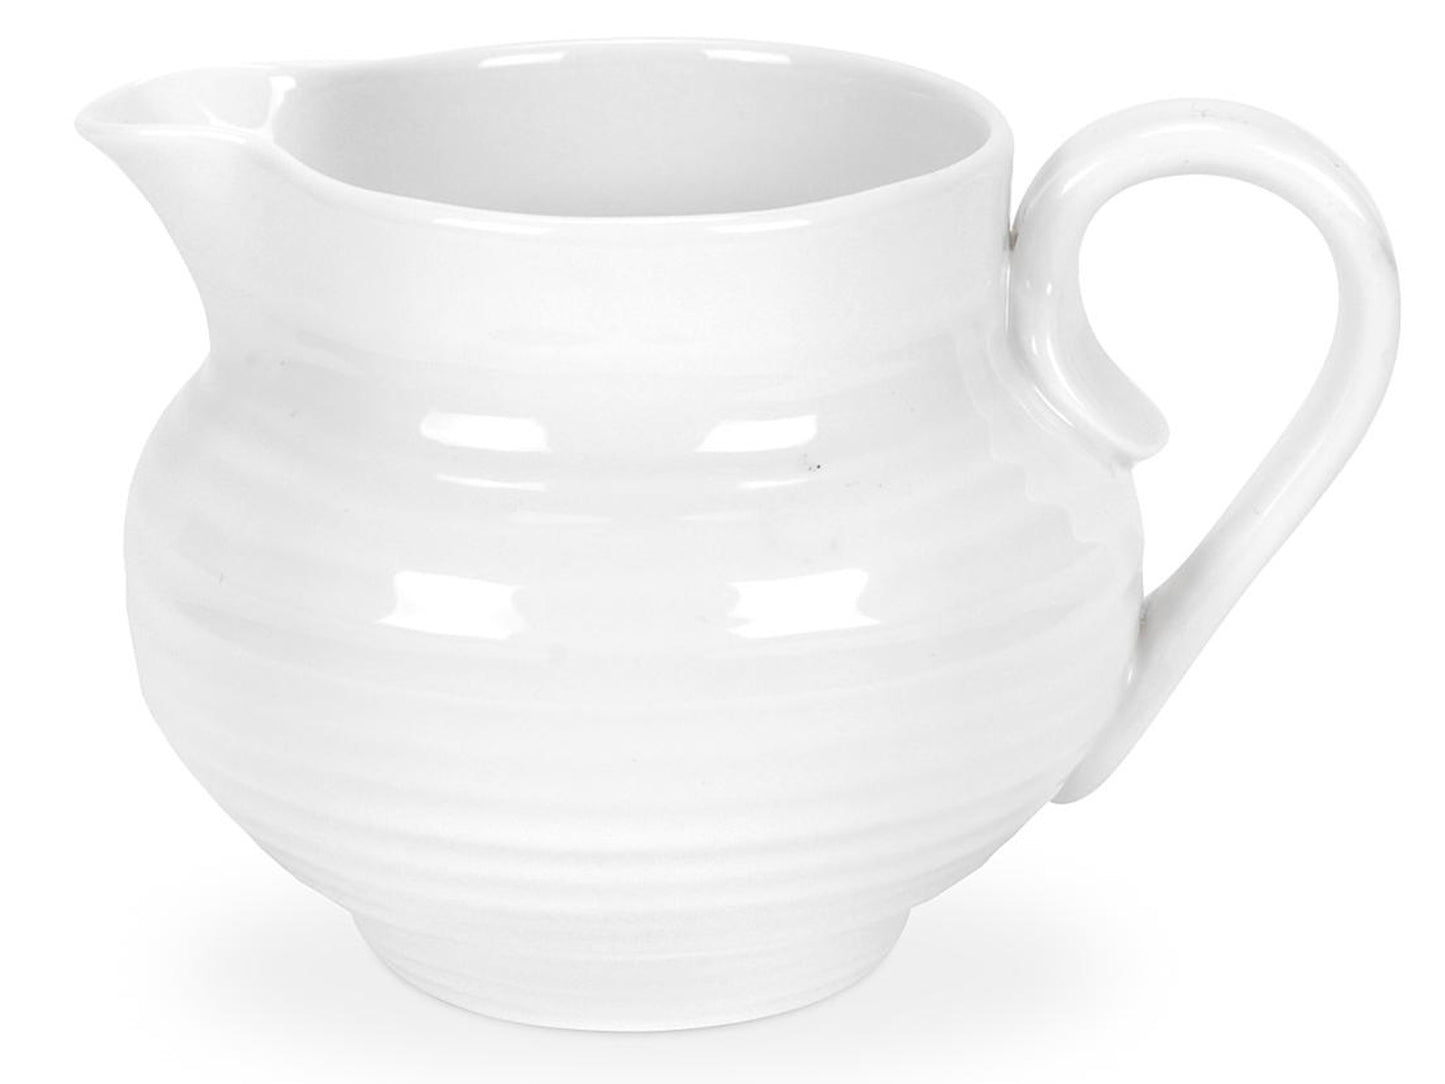 A rippled white porcelain jug with a stout body and small spout